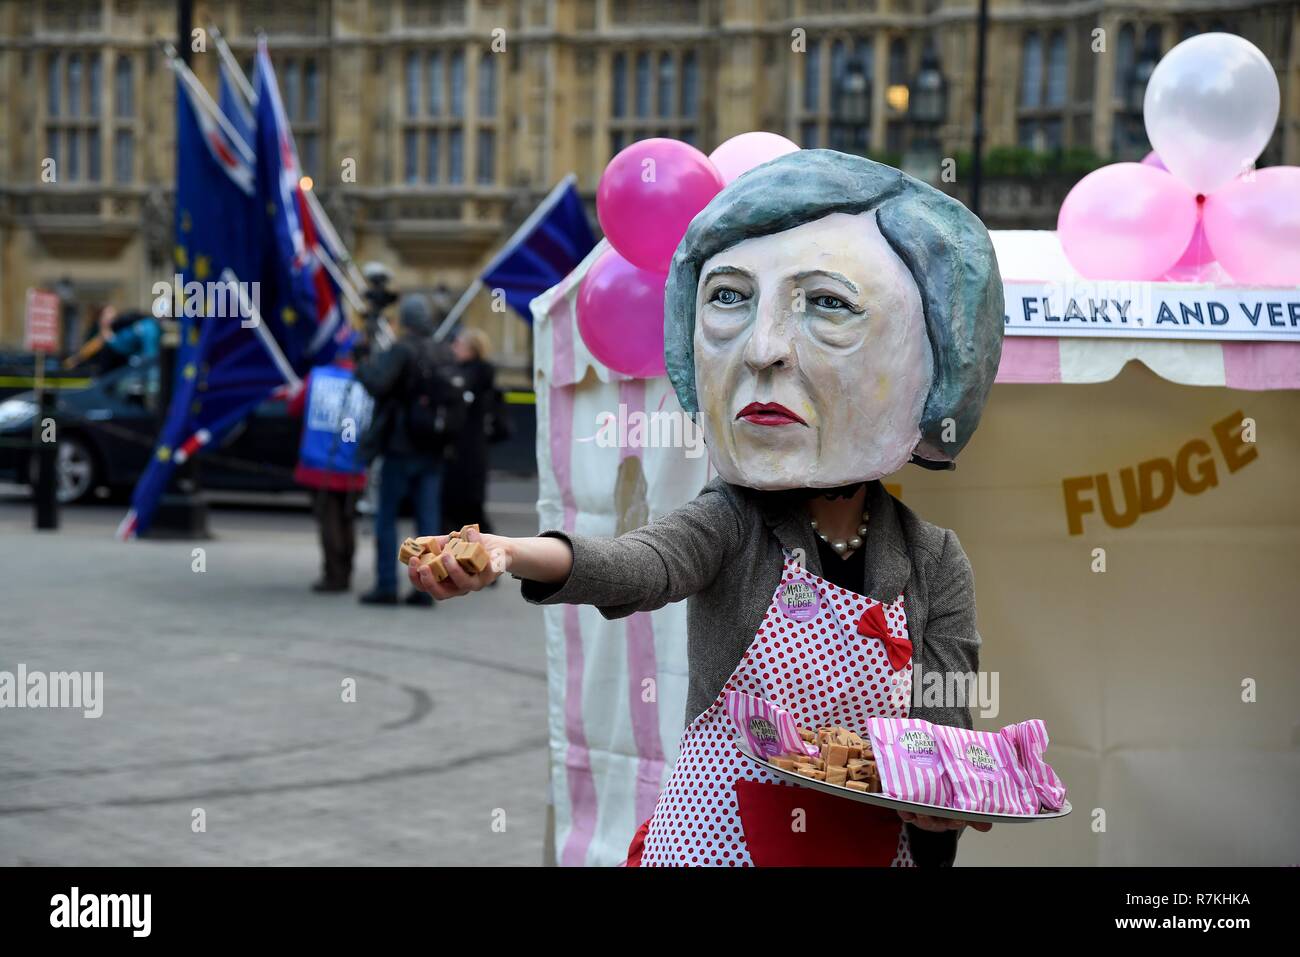 Theresa May and the Brexit Fudge stall, Westminster, London Credit: Finnbarr Webster/Alamy Live News Stock Photo